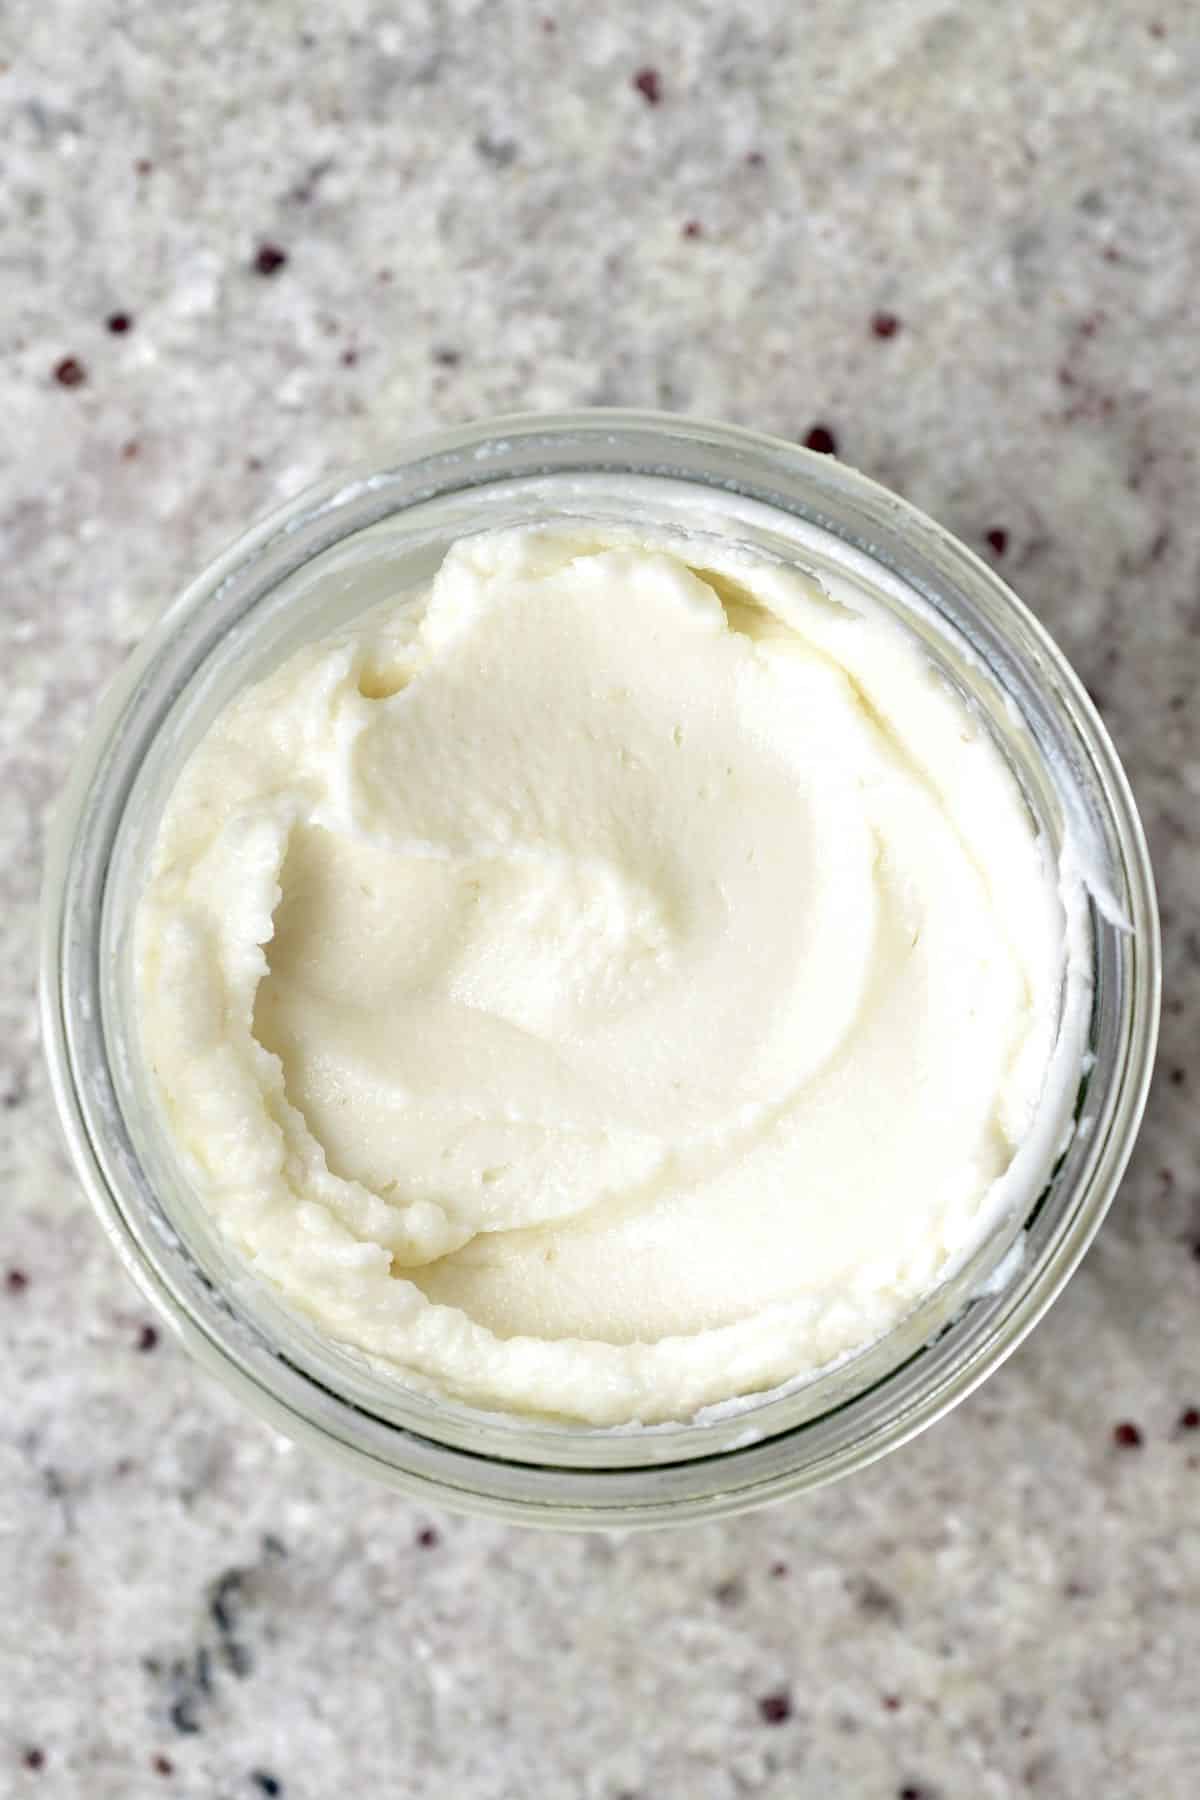 Top view of an open jar filled with garlic sauce